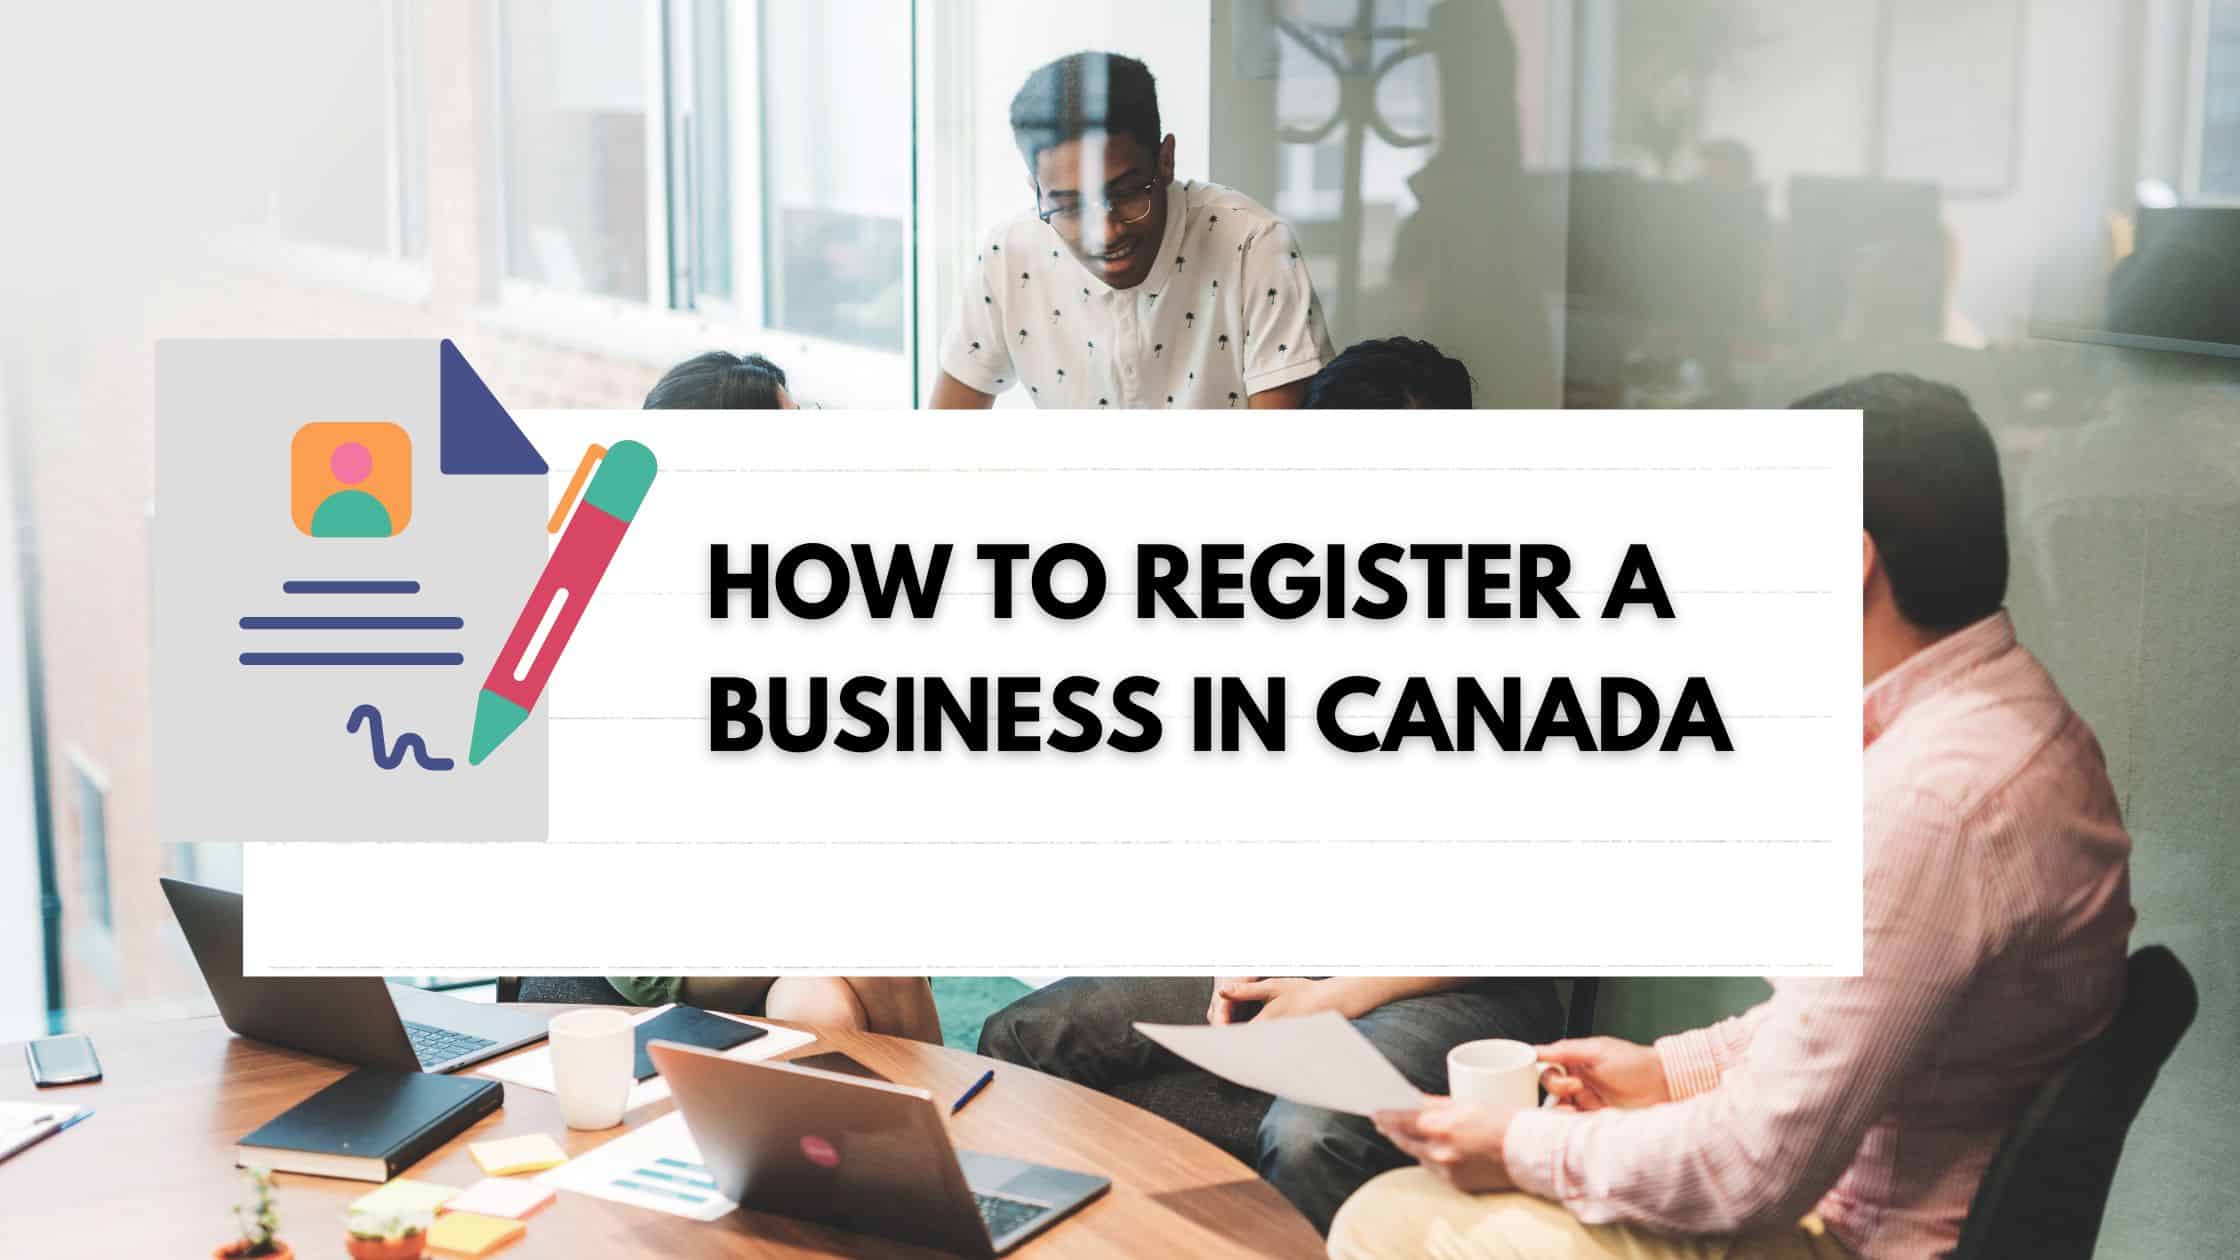 How to register a business in Canada